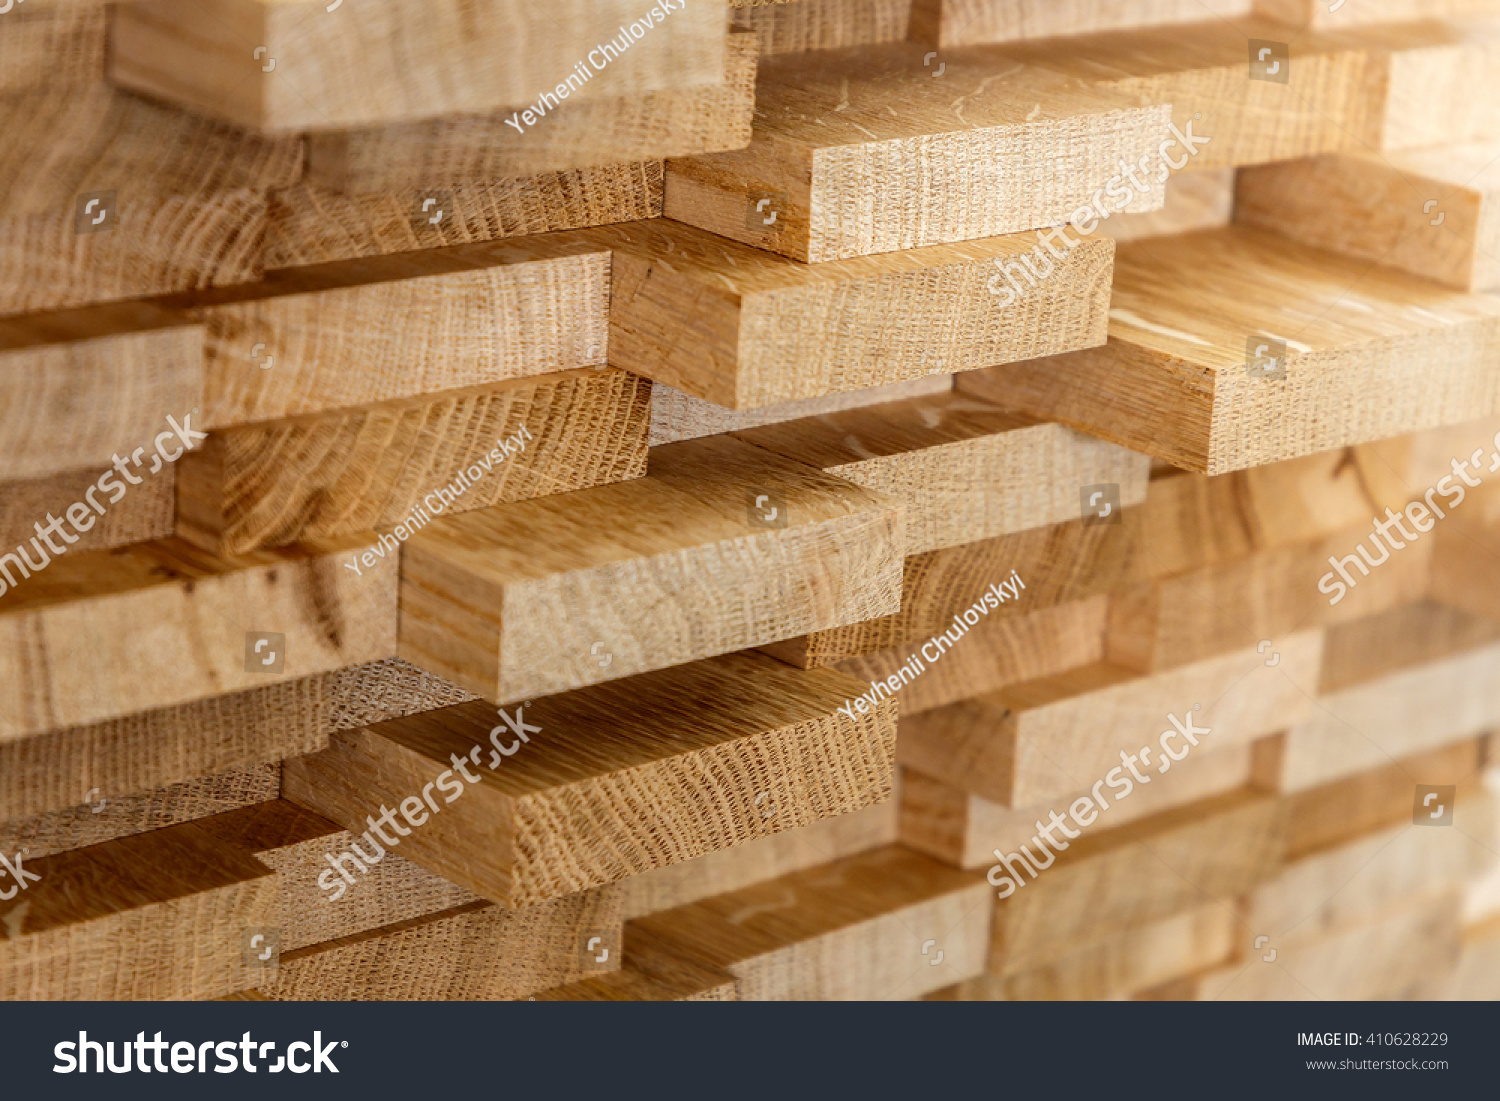 Wood timber construction material for background and texture. #410628229